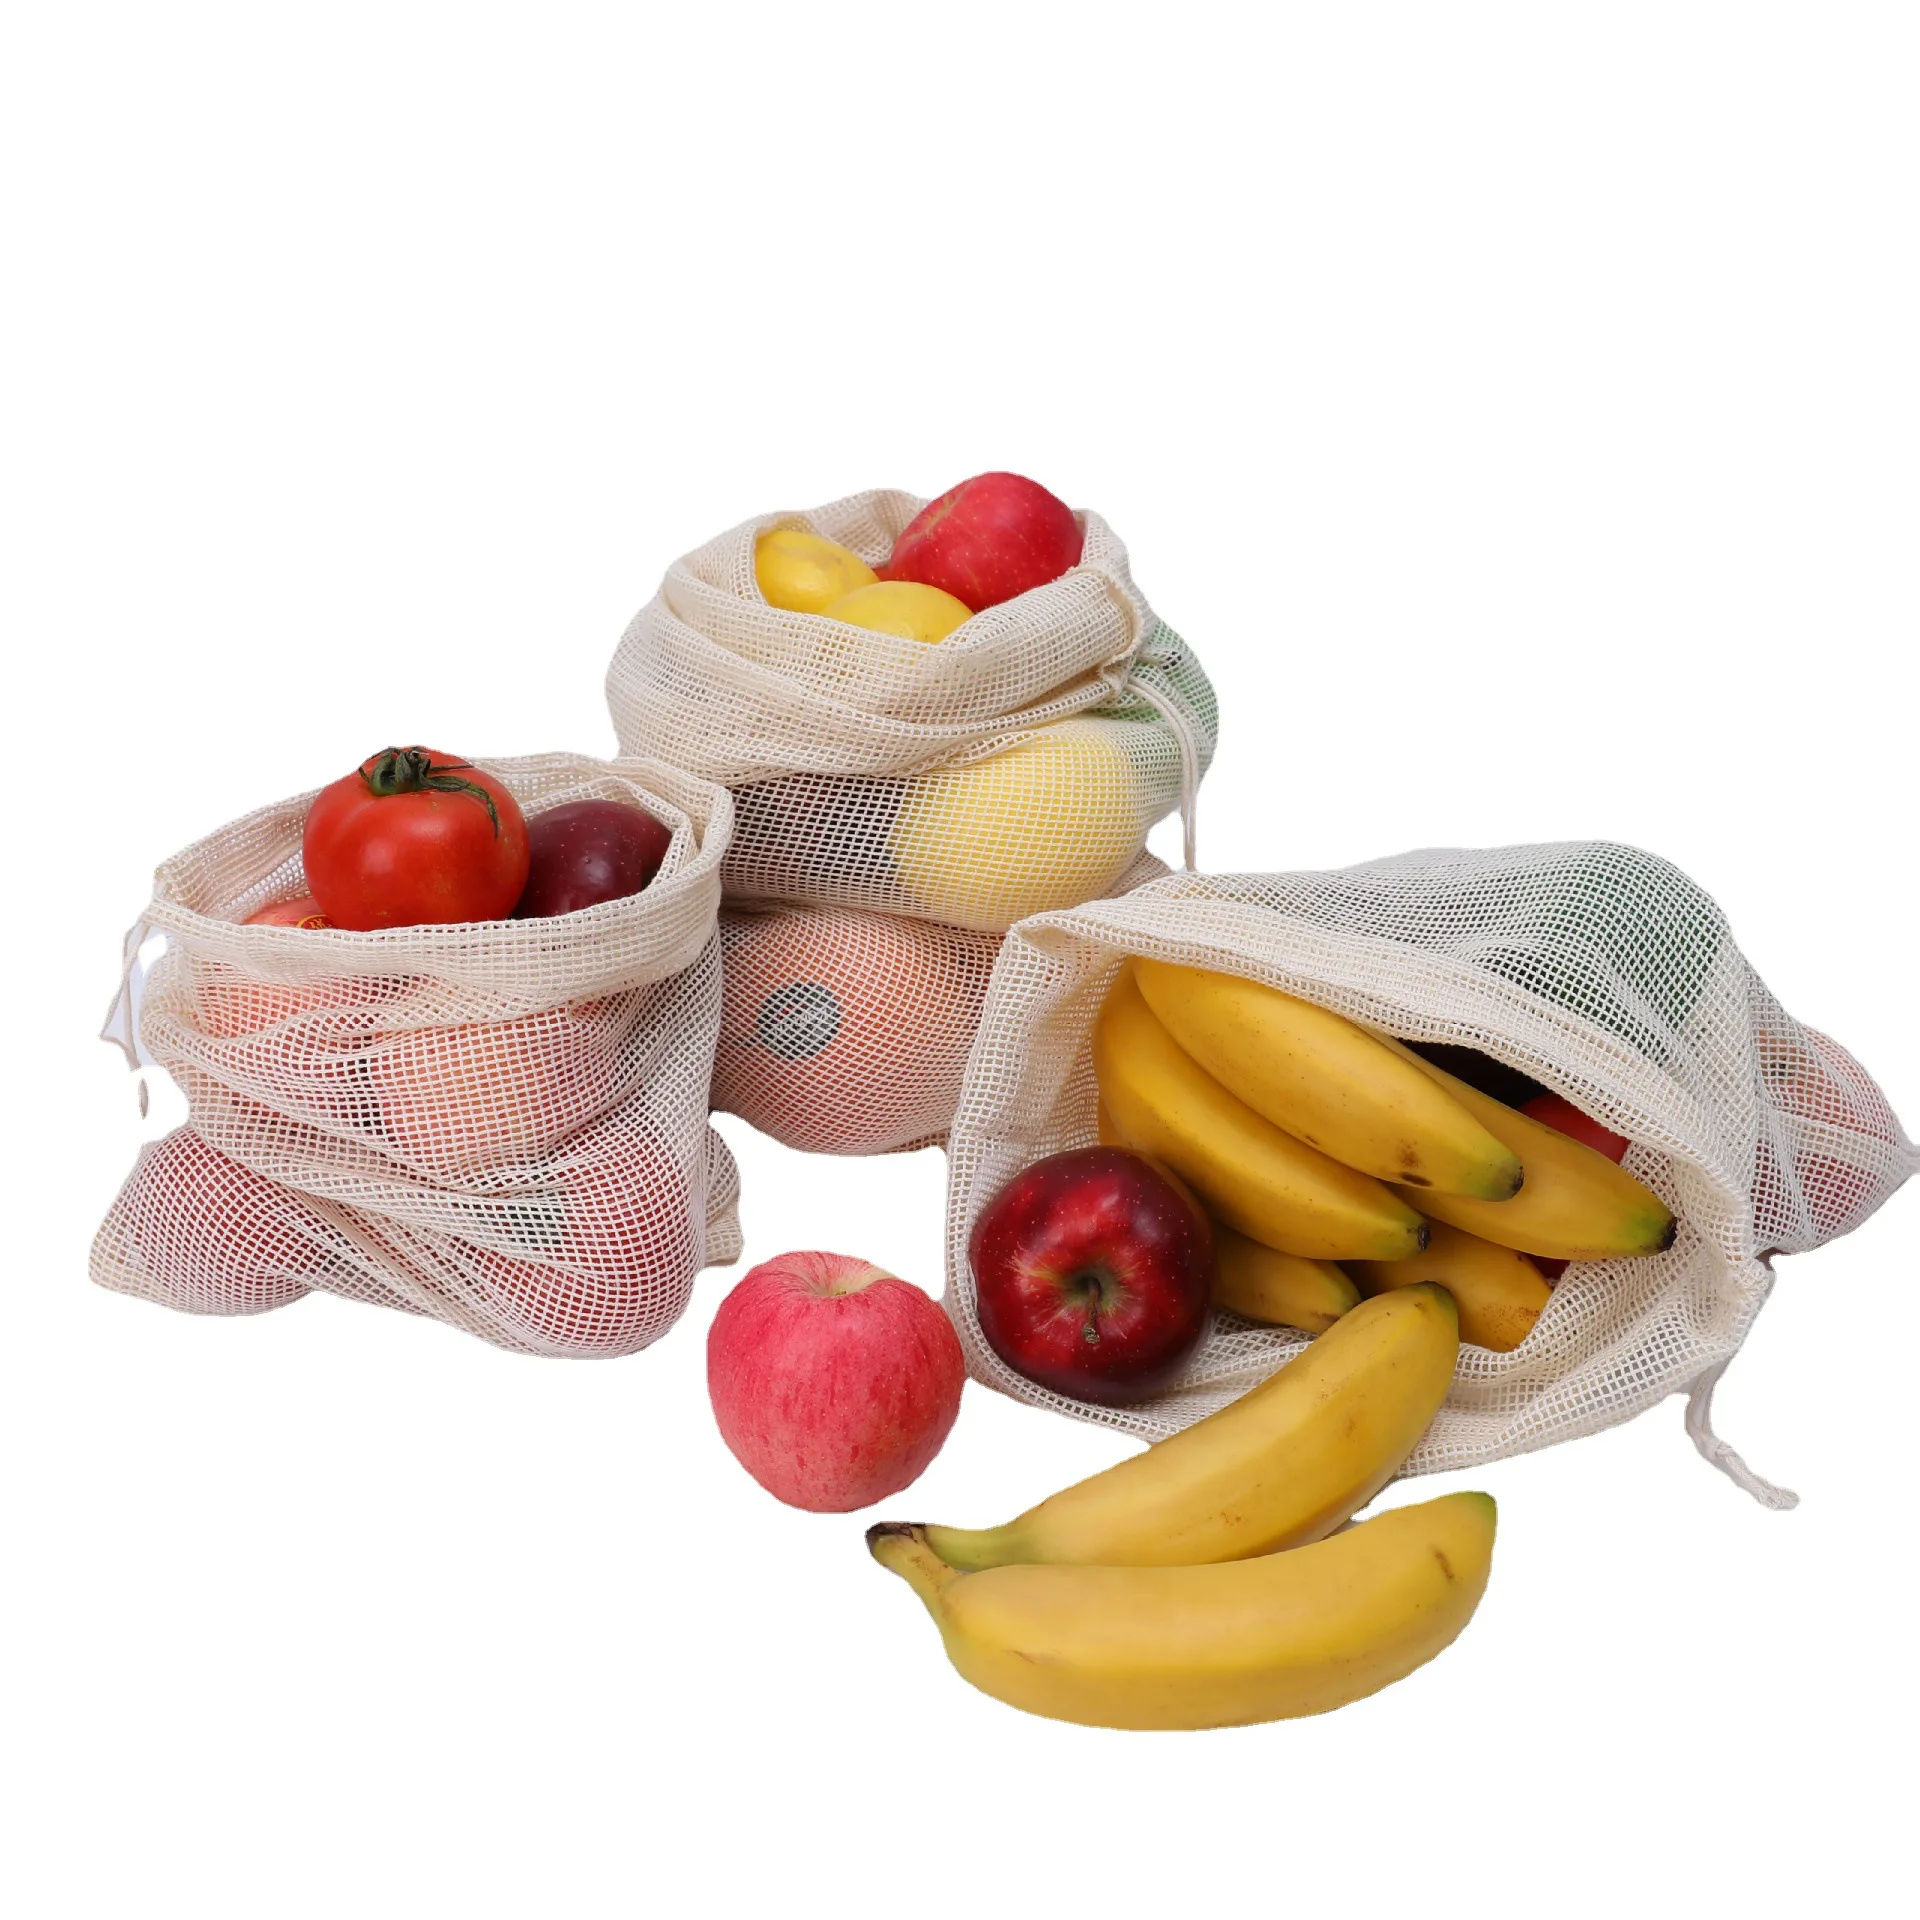 

Pure cotton mesh net cloth food mesh bags with drawstring for fruits and vegetable shopping produce organic cotton mesh bags